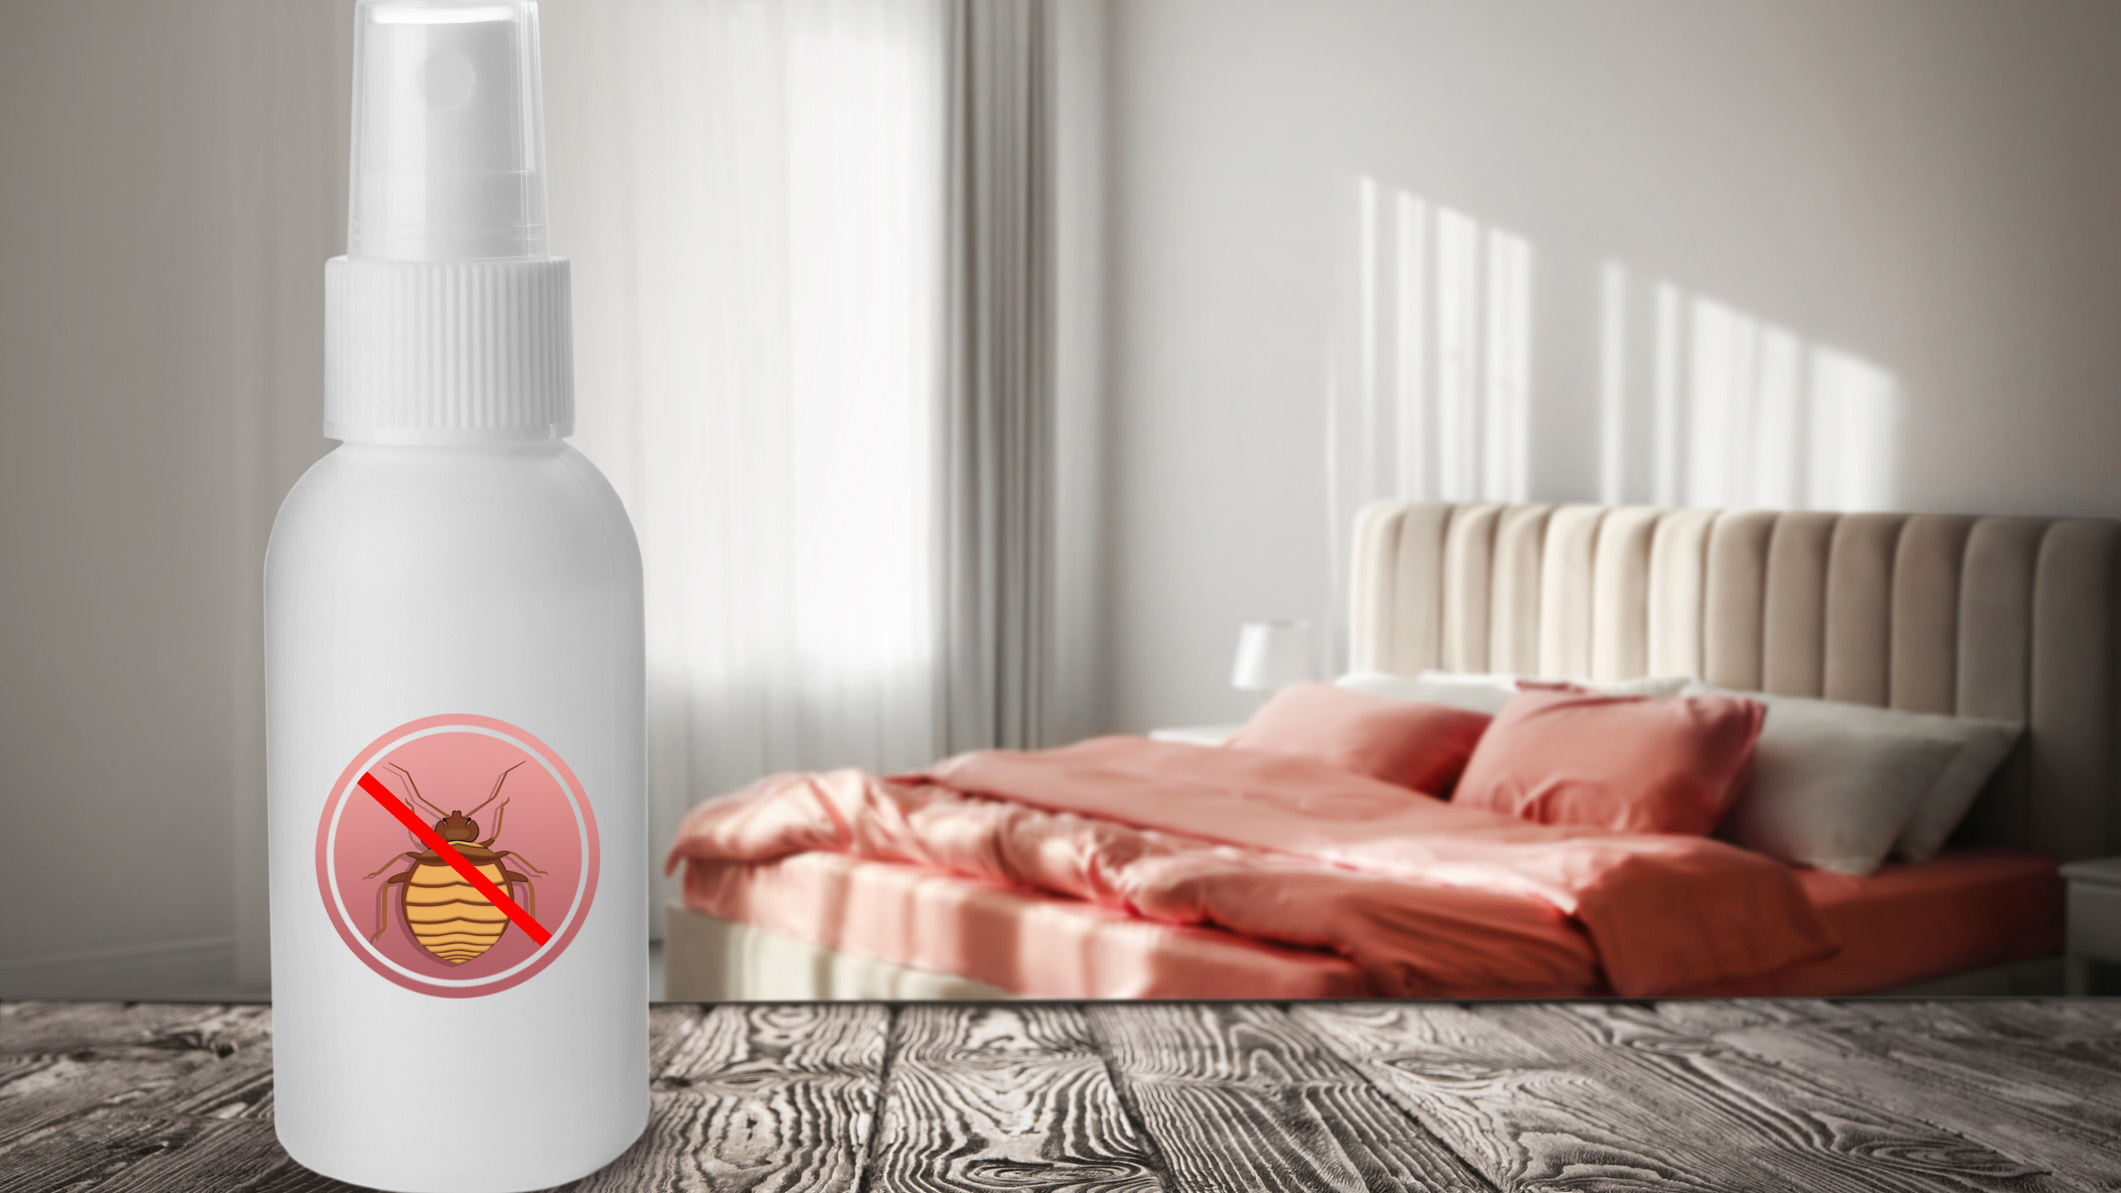 A person uses bed bug spray on an infested mattress